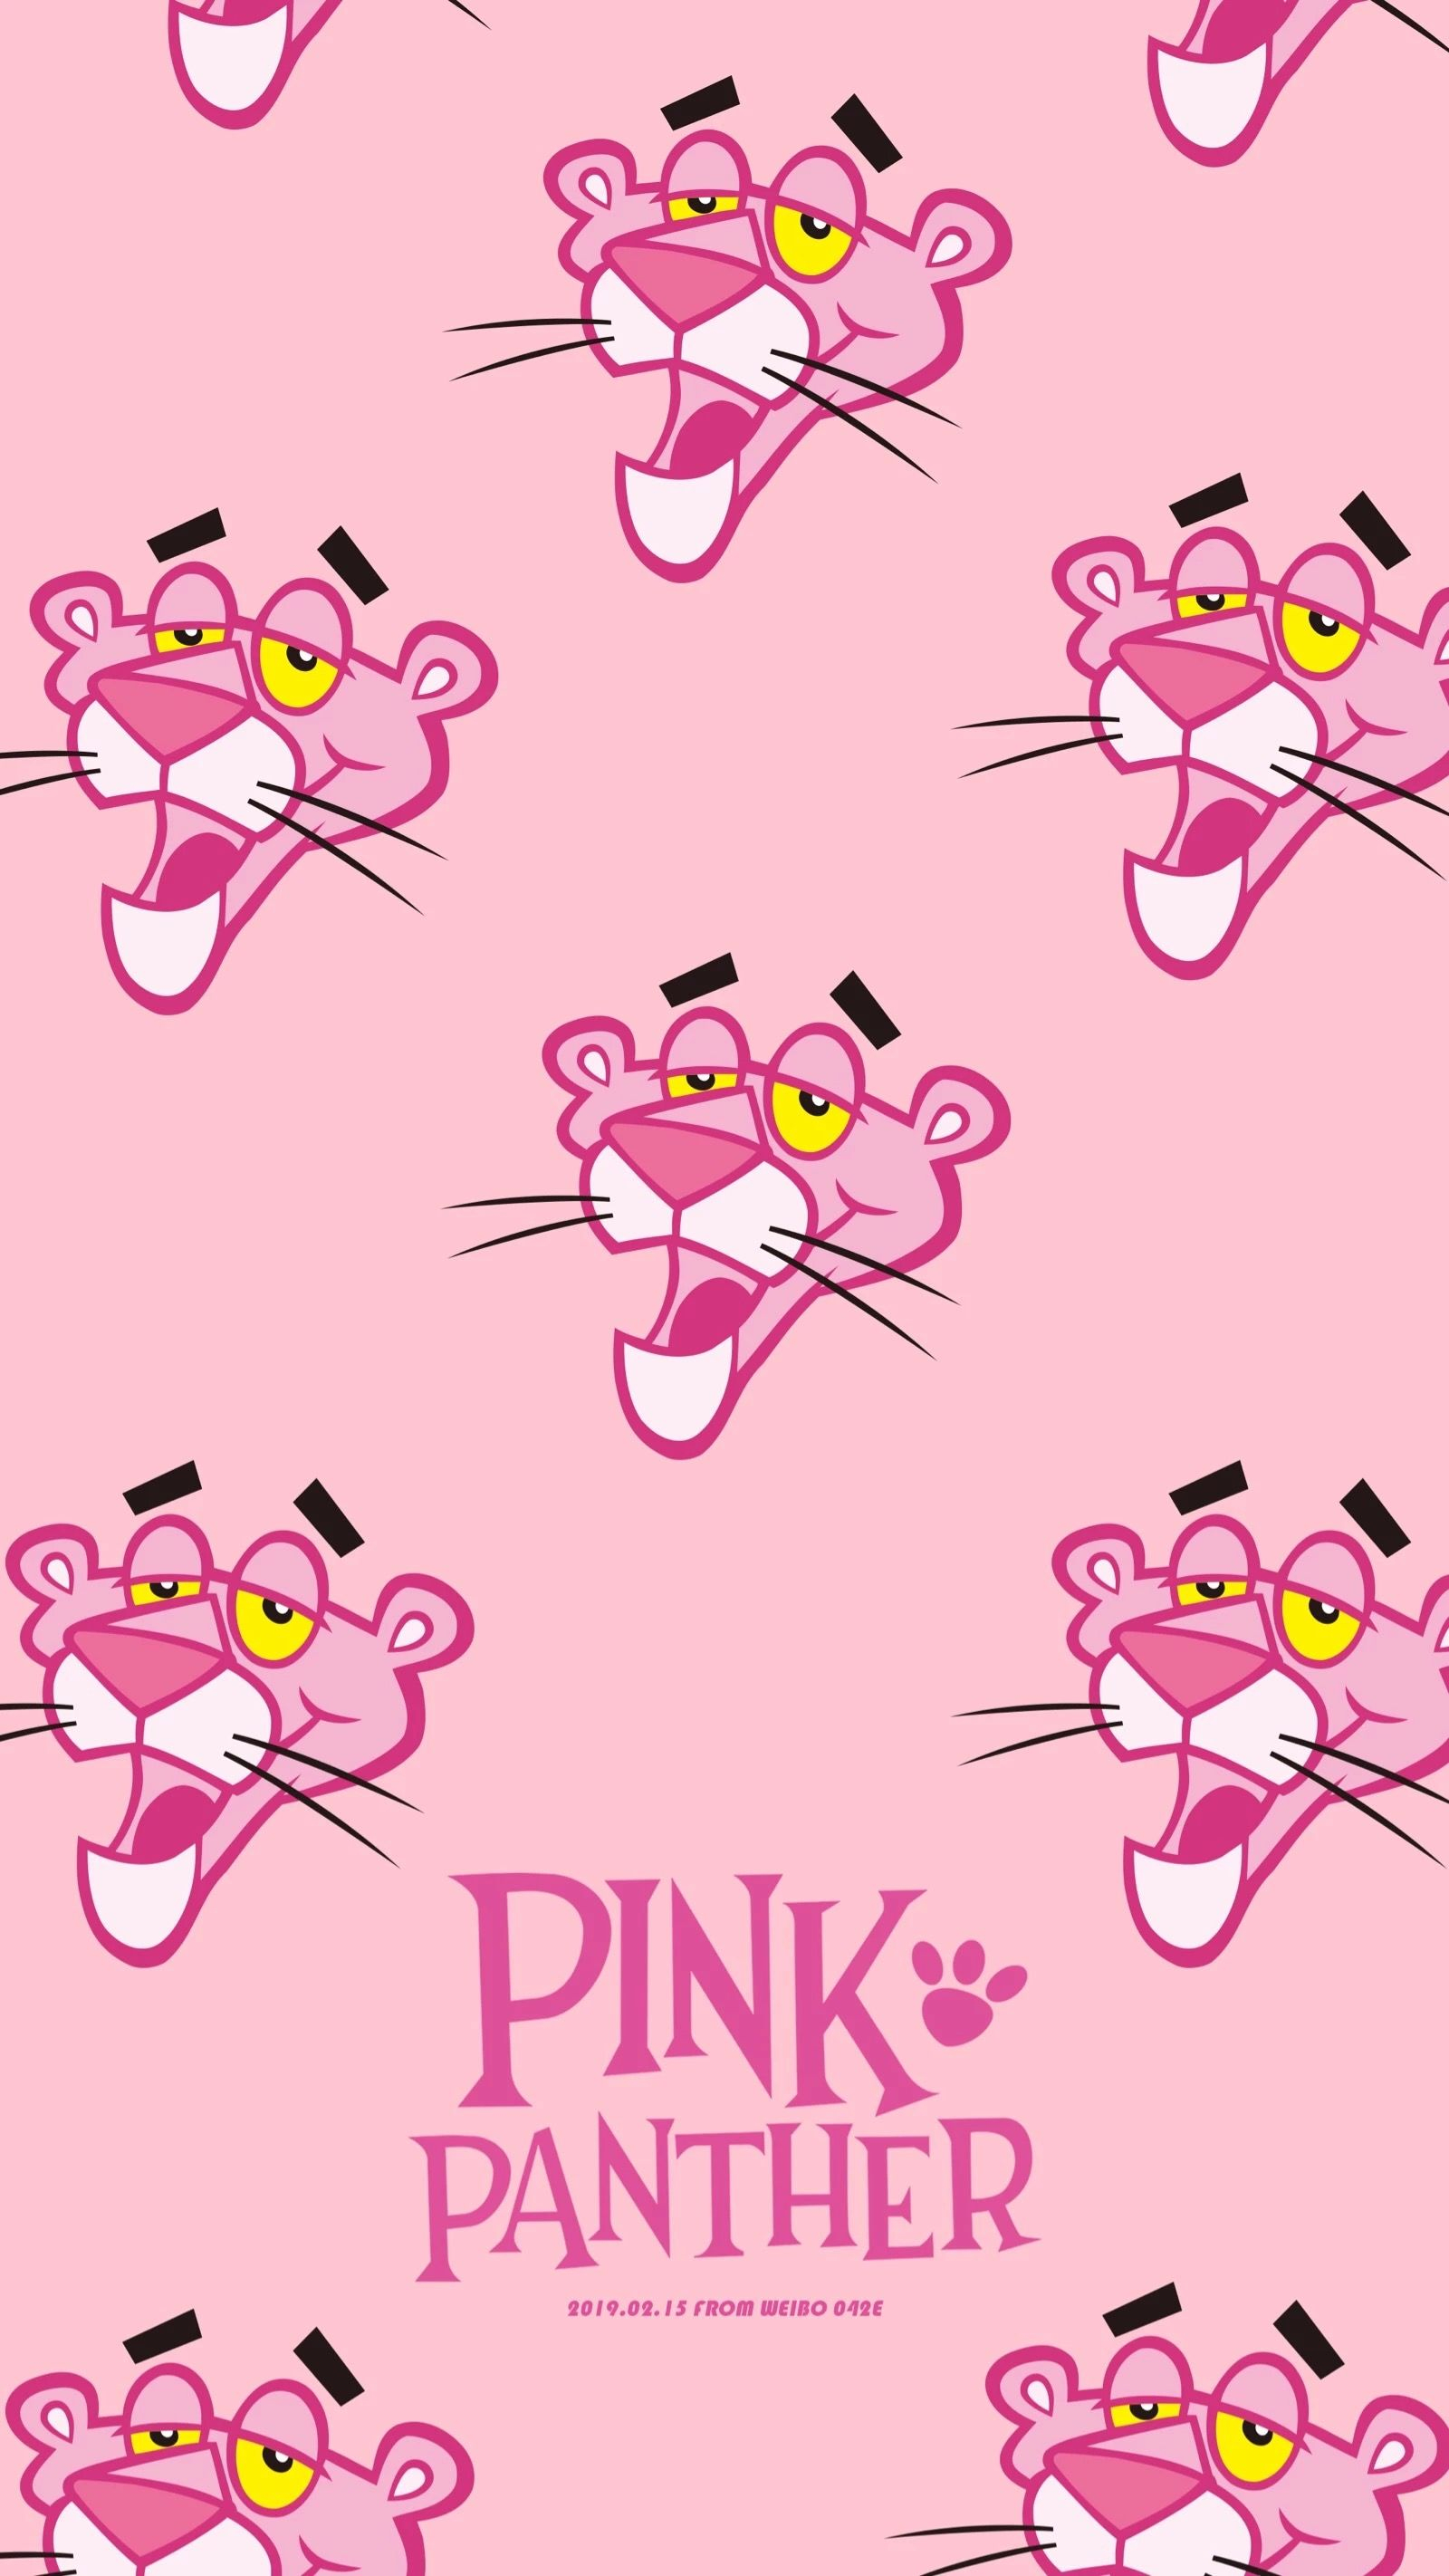 1600x2844 Pin by Pankeaw&agrave;&cedil;&#155;&agrave;&sup1;&#136;&agrave;&cedil;&sup2;&agrave;&cedil;&#153;&agrave;&sup1;&#129;&agrave;&cedil;&#129;&agrave;&sup1;&#137;&agrave;&cedil;&sect; on Cute Cartoon | Pink panthers, Pink panther cartoon, Pink wallpaper iphone